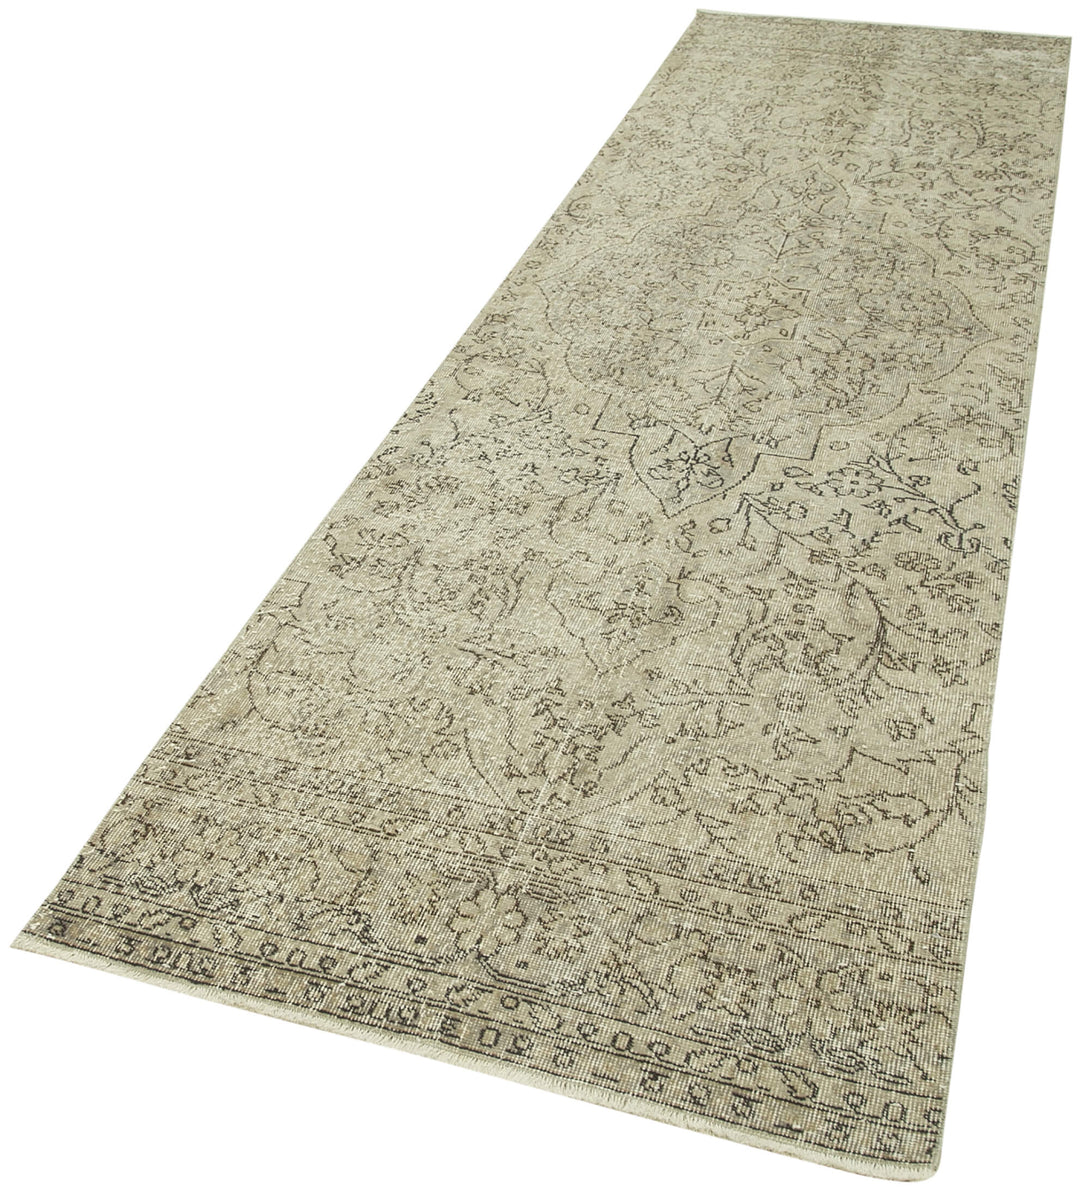 Handmade Overdyed Runner > Design# OL-AC-38170 > Size: 3'-2" x 11'-10", Carpet Culture Rugs, Handmade Rugs, NYC Rugs, New Rugs, Shop Rugs, Rug Store, Outlet Rugs, SoHo Rugs, Rugs in USA